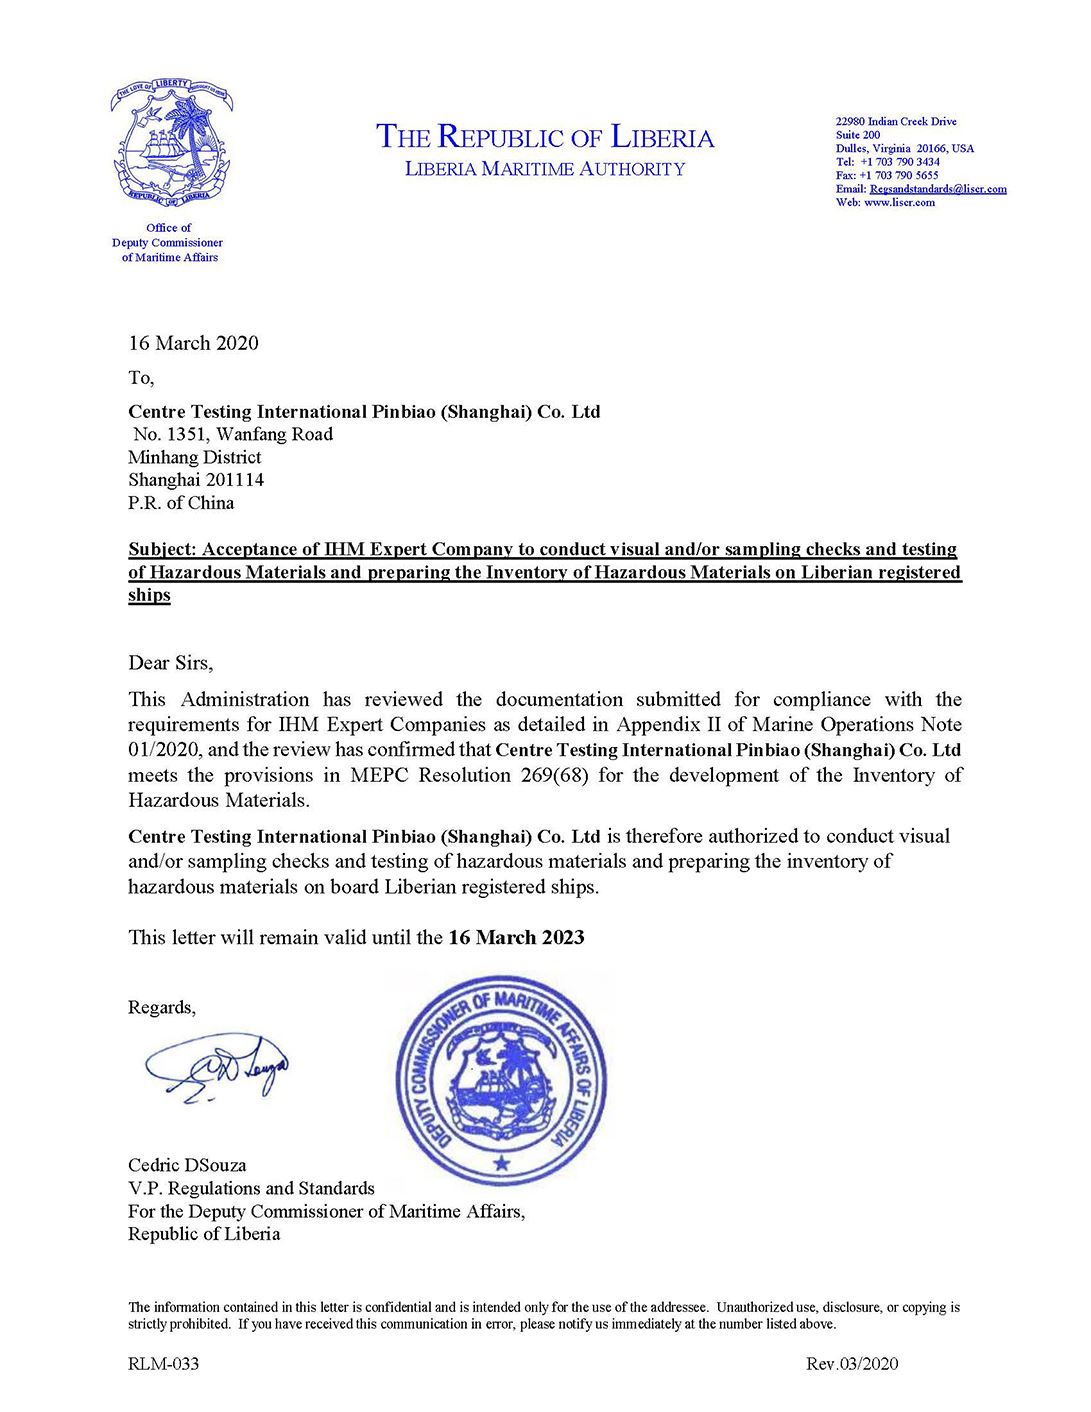 IHM Expert Company letter of acceptance